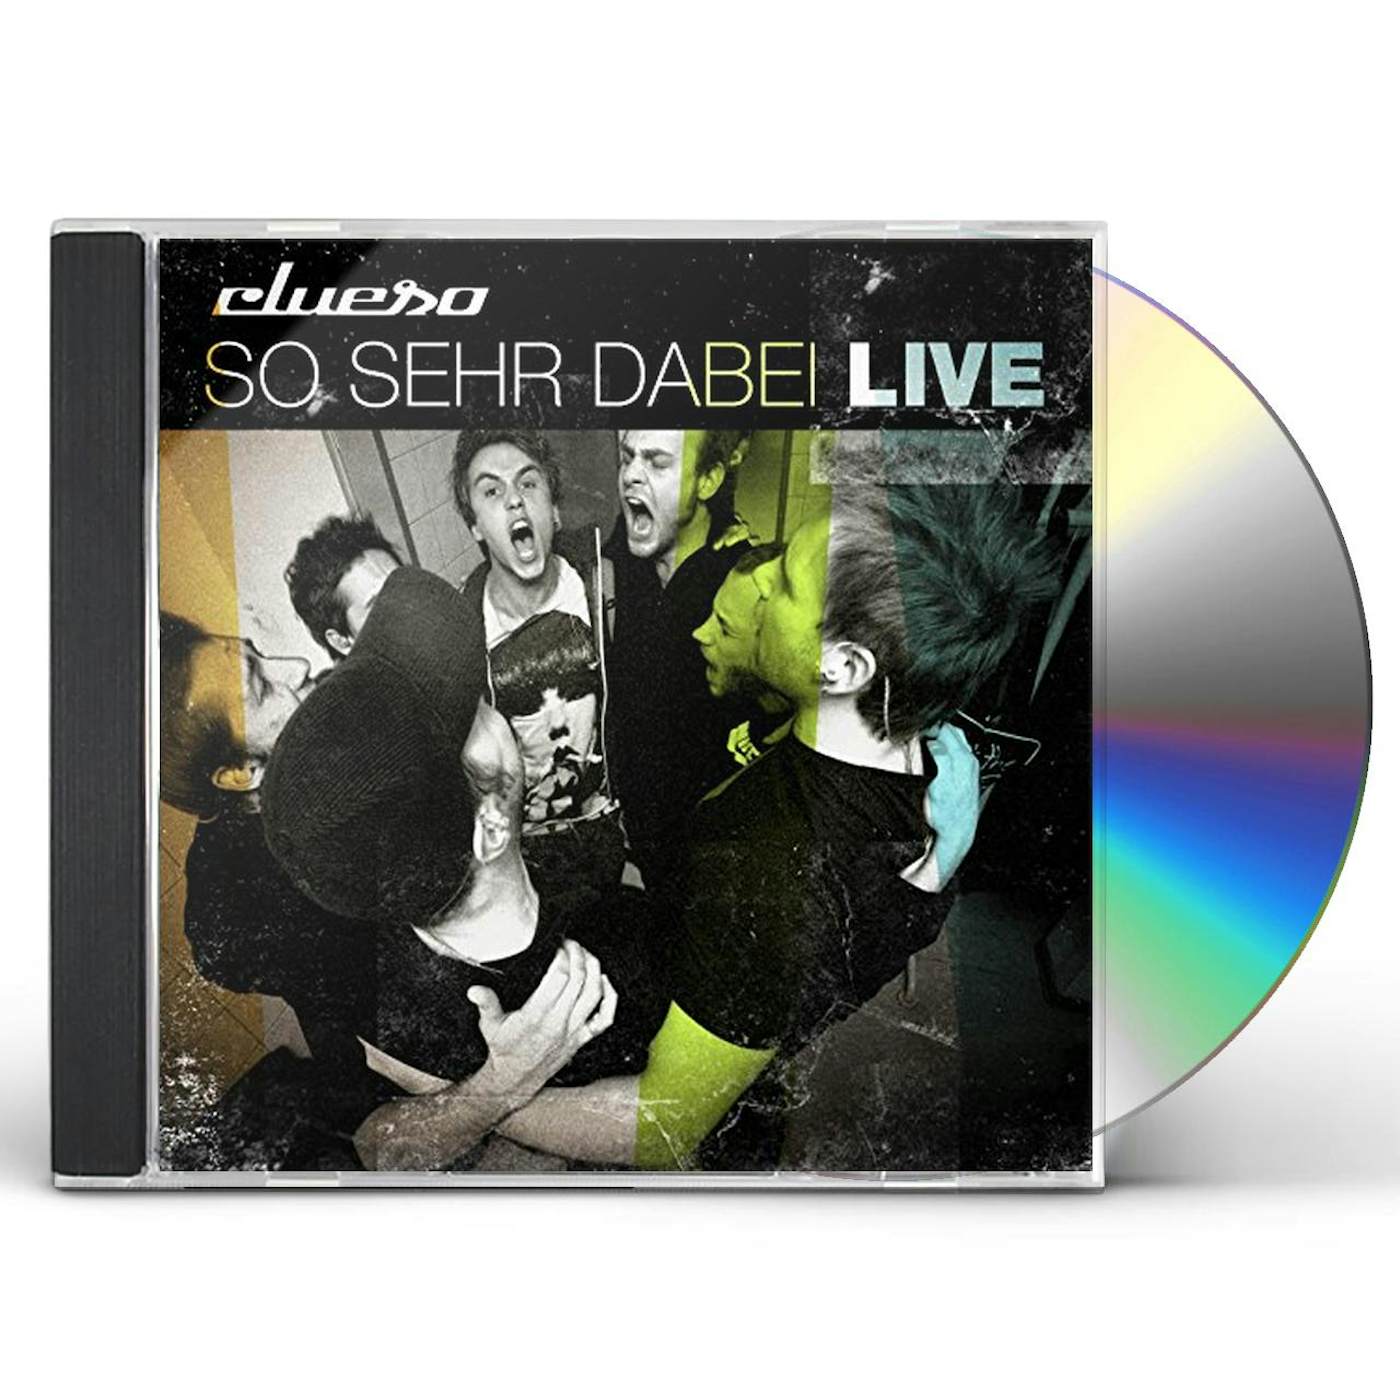 Clueso SO SEHR DABEI-LIVE CD